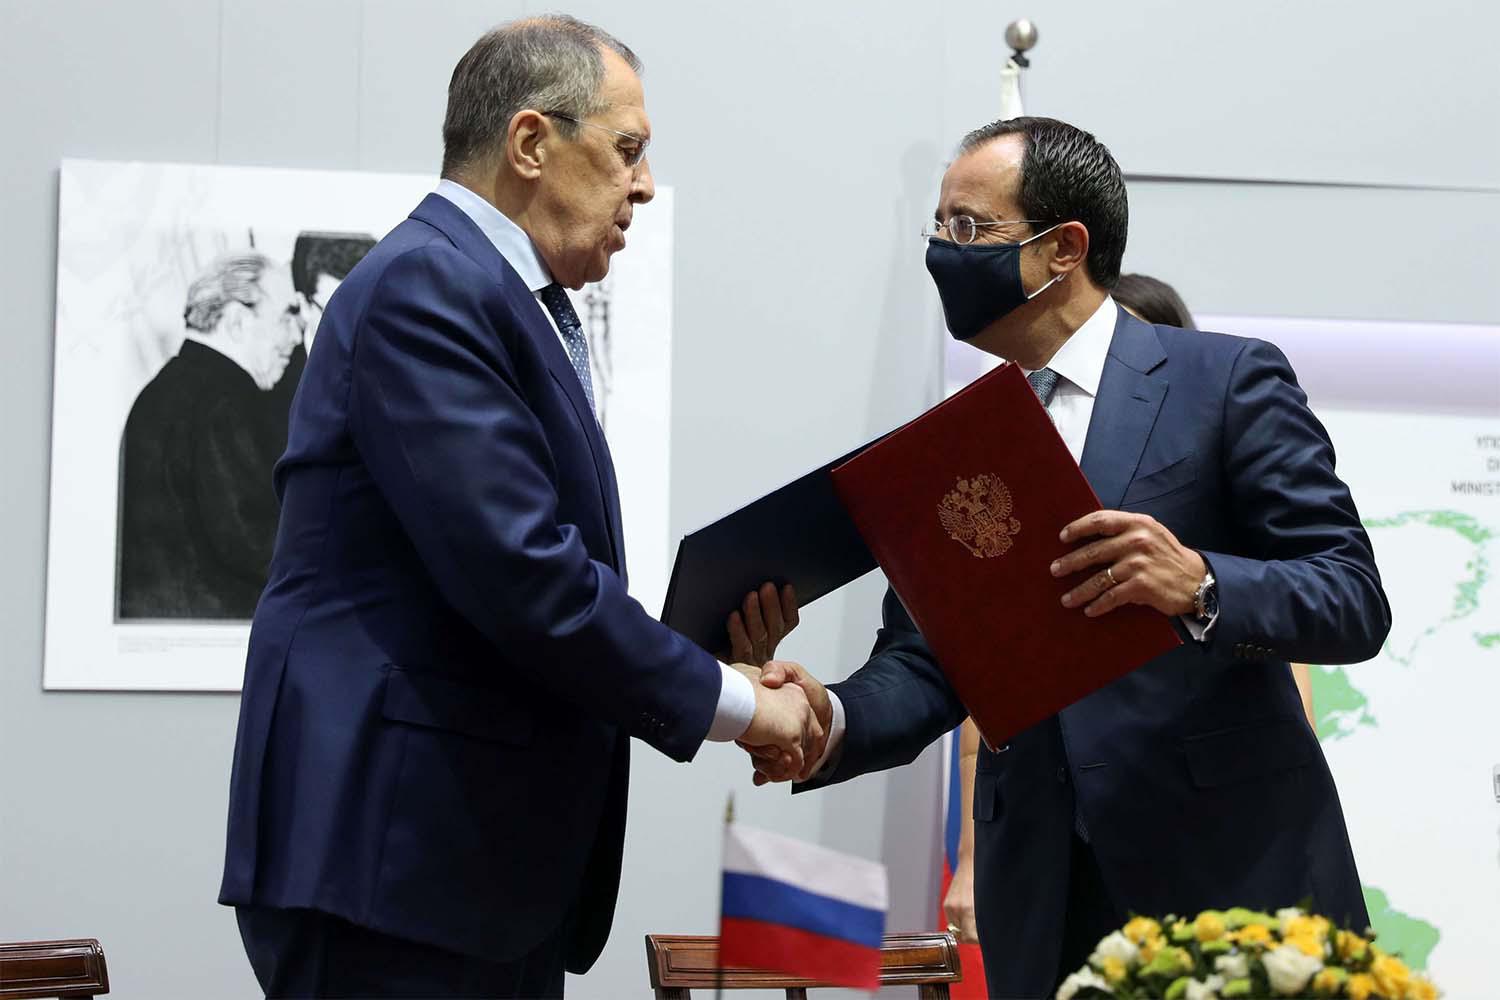 Russian Foreign Minister Sergei Lavrov and Cypriot Foreign Minister Nikos Christodoulides